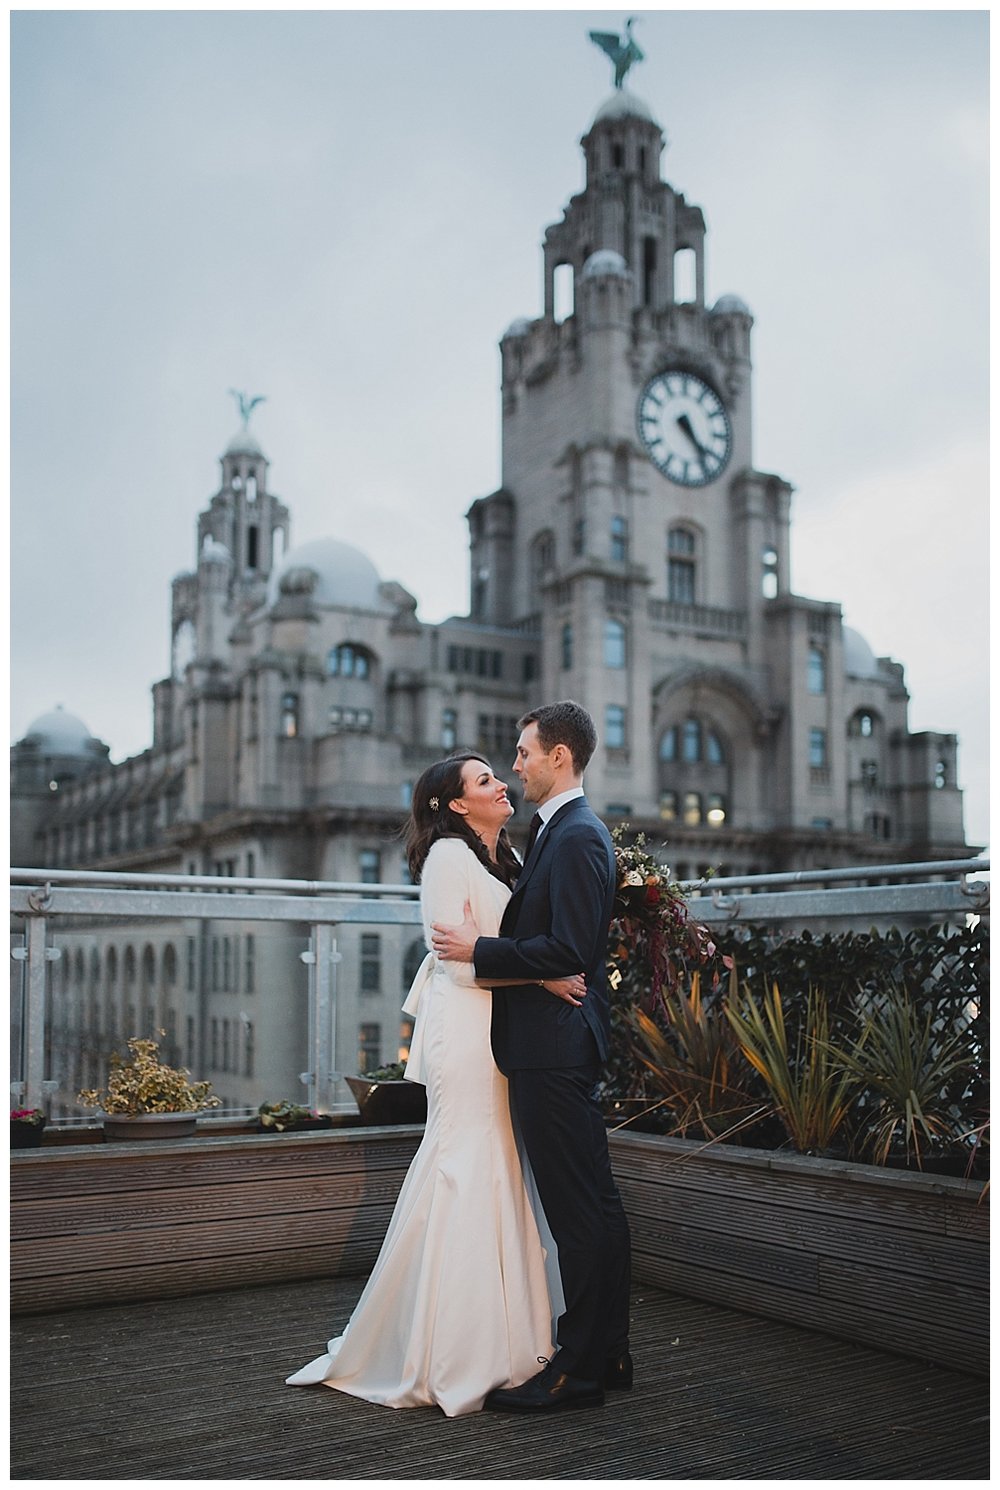  Bride and groom on the roof terrace at Oh Me Oh My Liverpool. The Liver building and Liver birds in the background. 